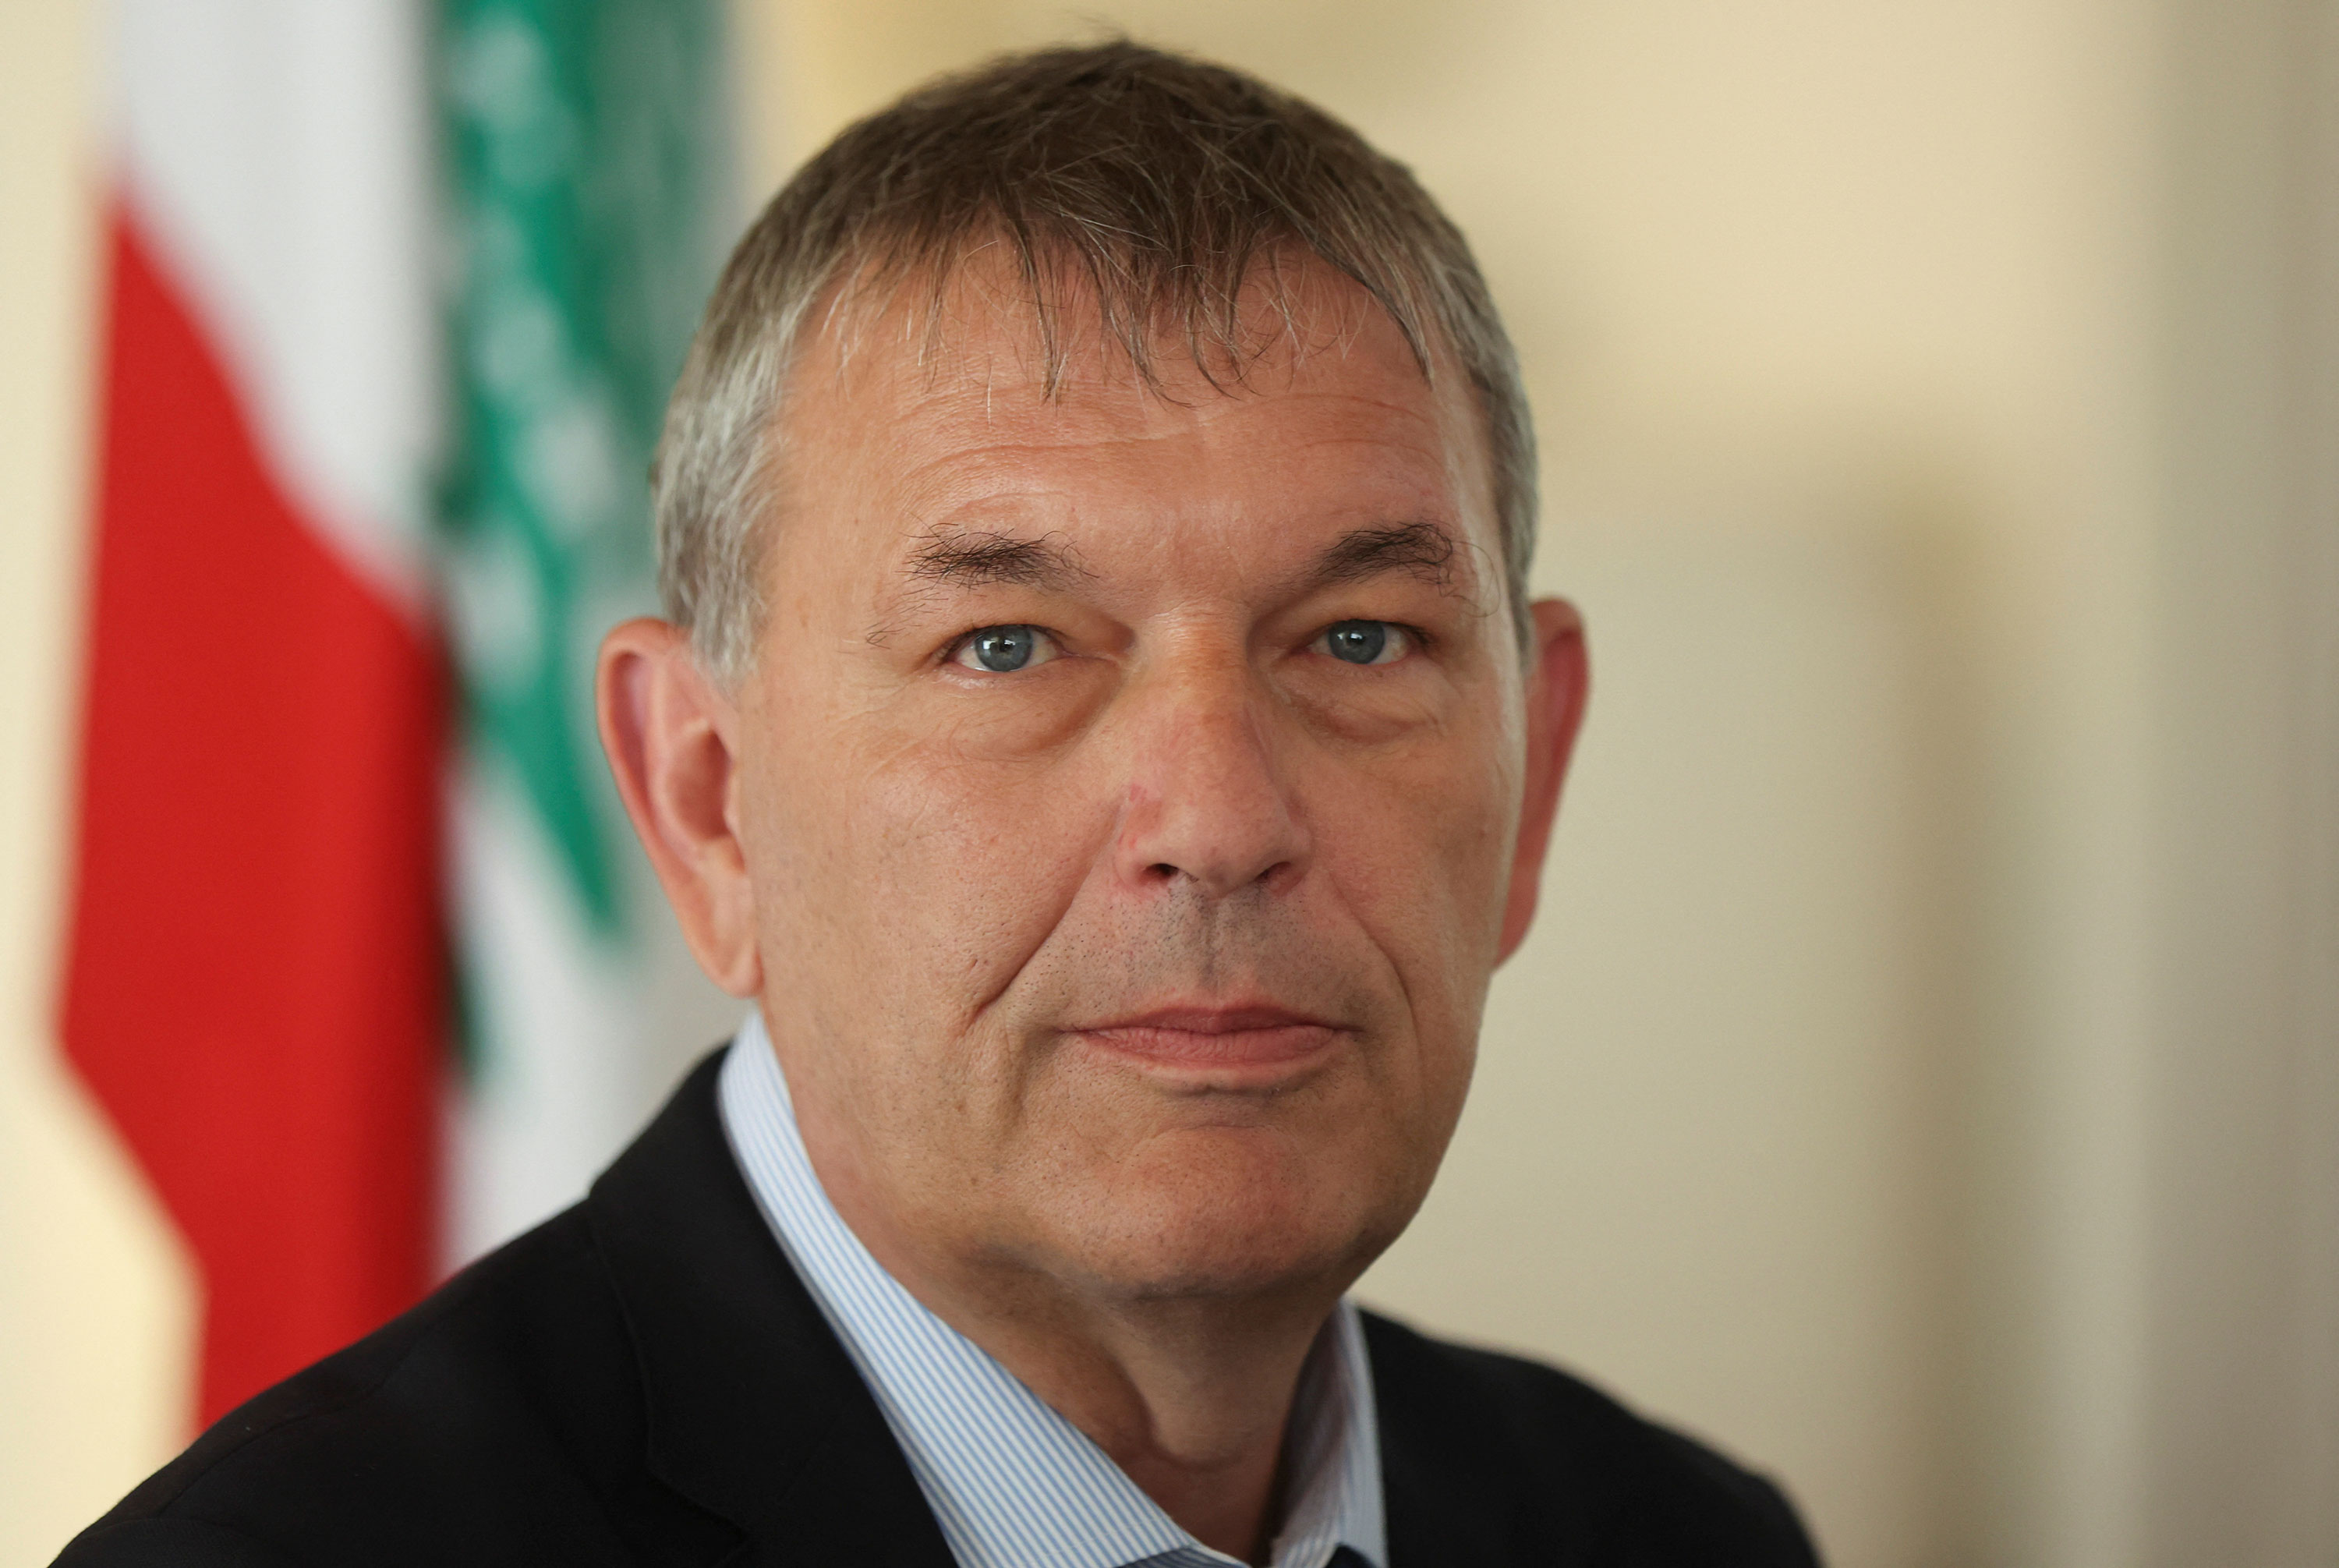 Philippe Lazzarini, commissioner general of the United Nations Relief and Works Agency for Palestine Refugees in the Near East, attends a press conference in Beirut, Lebanon, in June 2023.